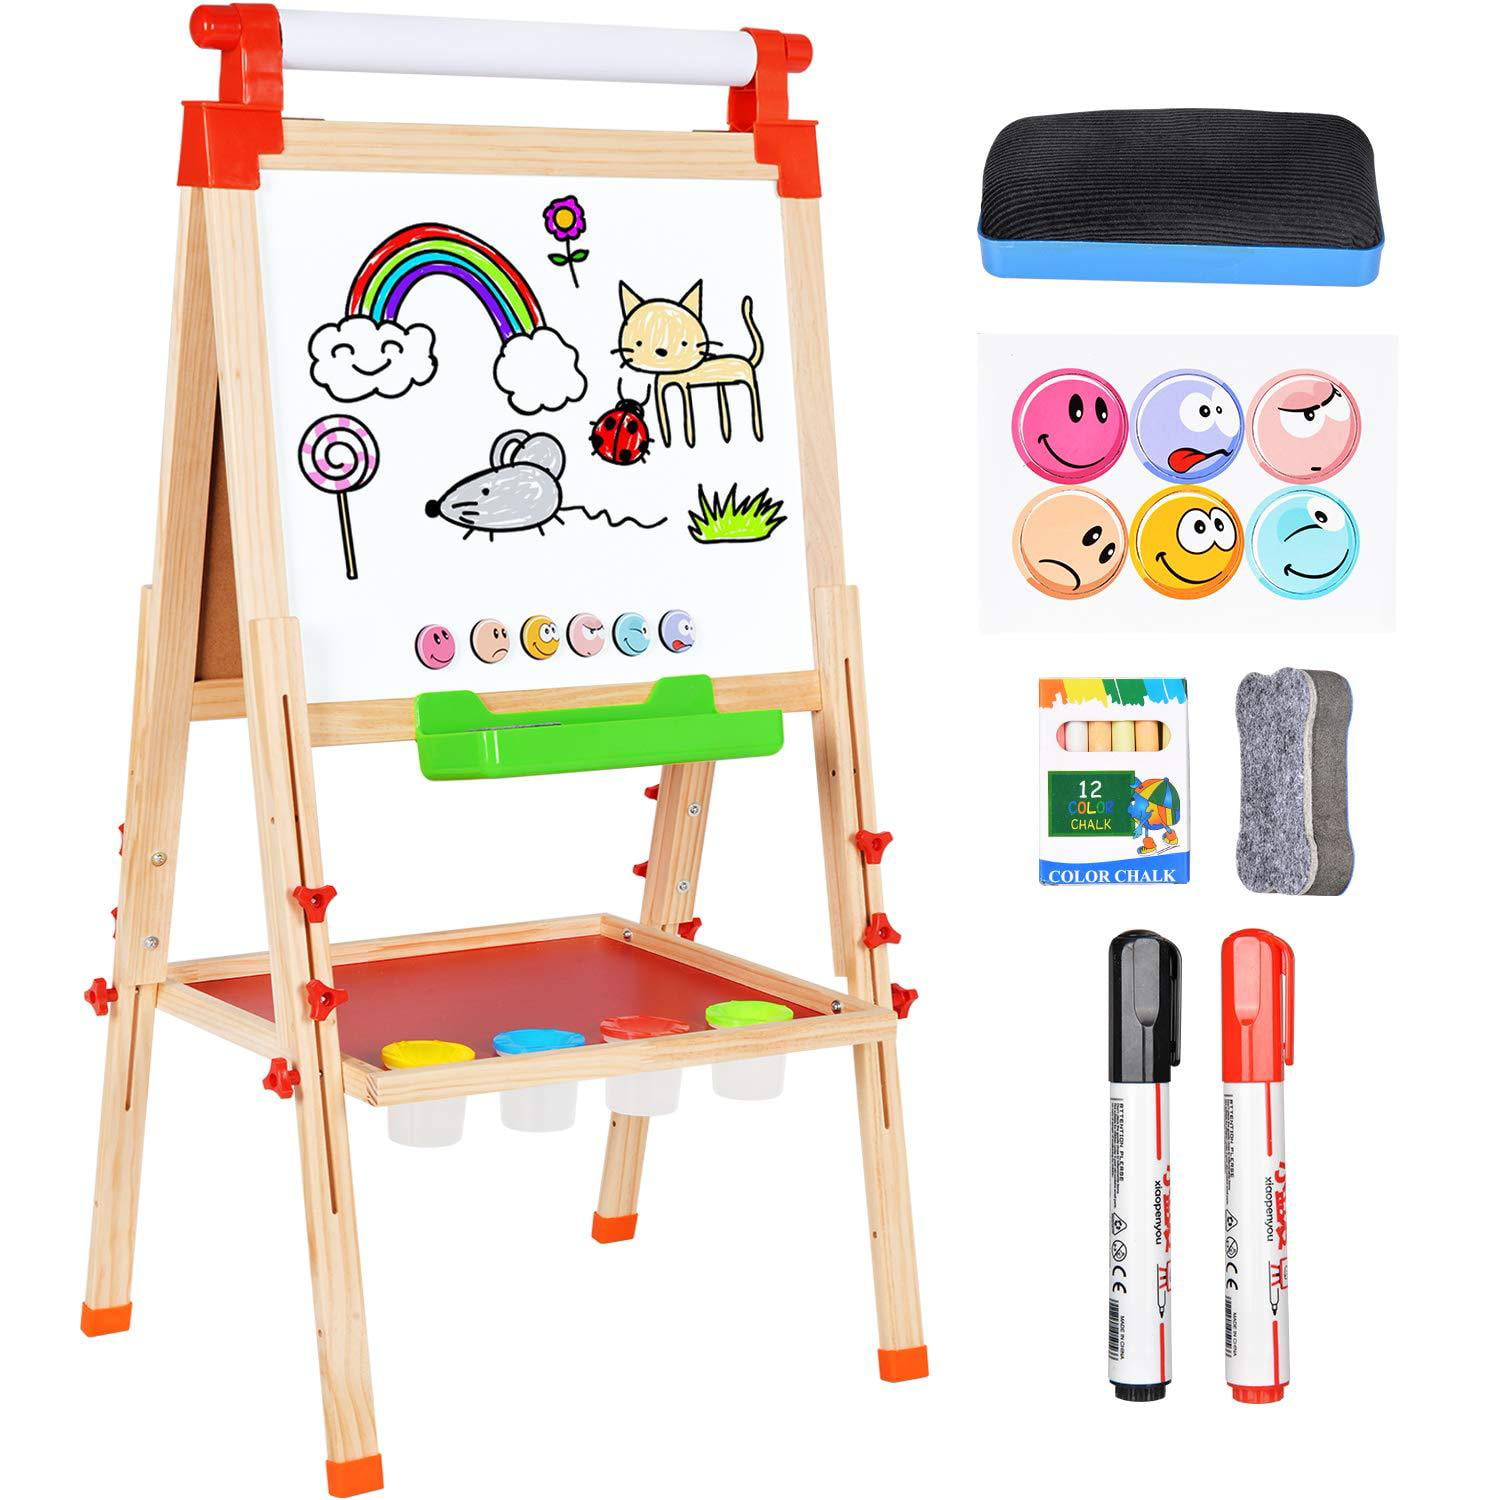 Letters and Numbers Magnets and Other Accessories Best Birthday Gift for Kids with Paper Roll Holder with Magnetic Dry Erase Board and Chalkboard for Kid JOYMOR 3 in 1 Wooden Art Easel for Kids 